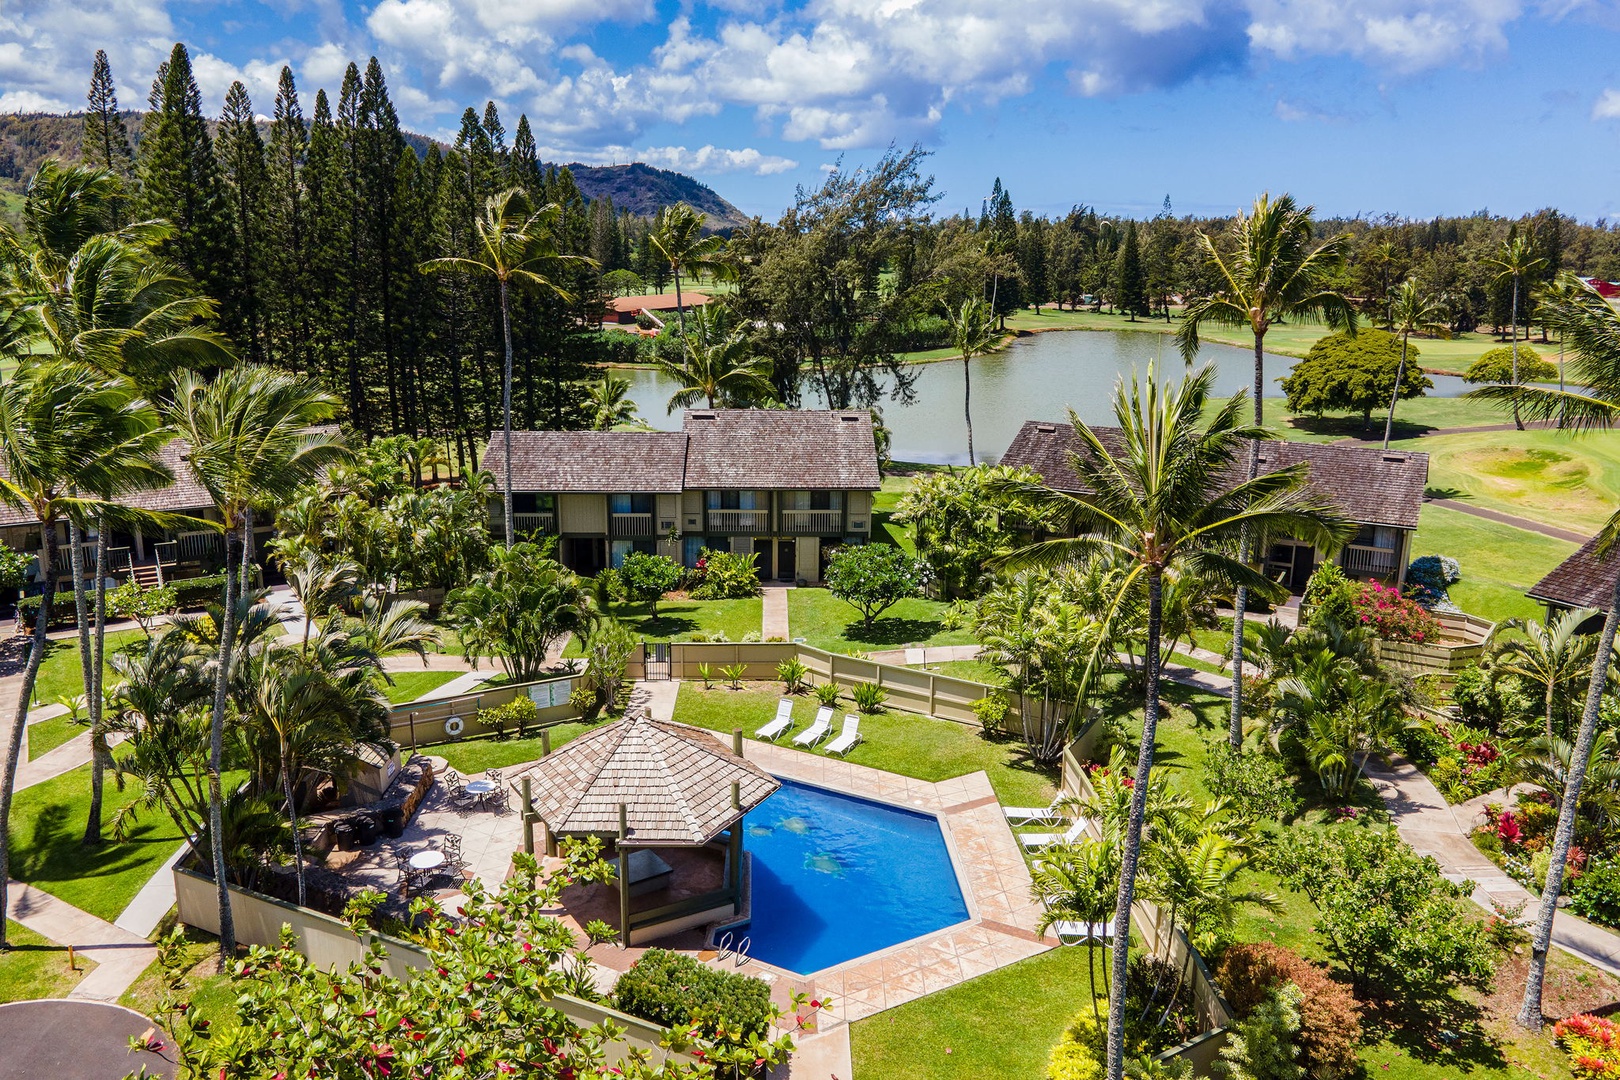 Kahuku Vacation Rentals, Turtle Bay's Kuilima Estates West #104 - You'll certainly feel like you're in paradise at the community pool